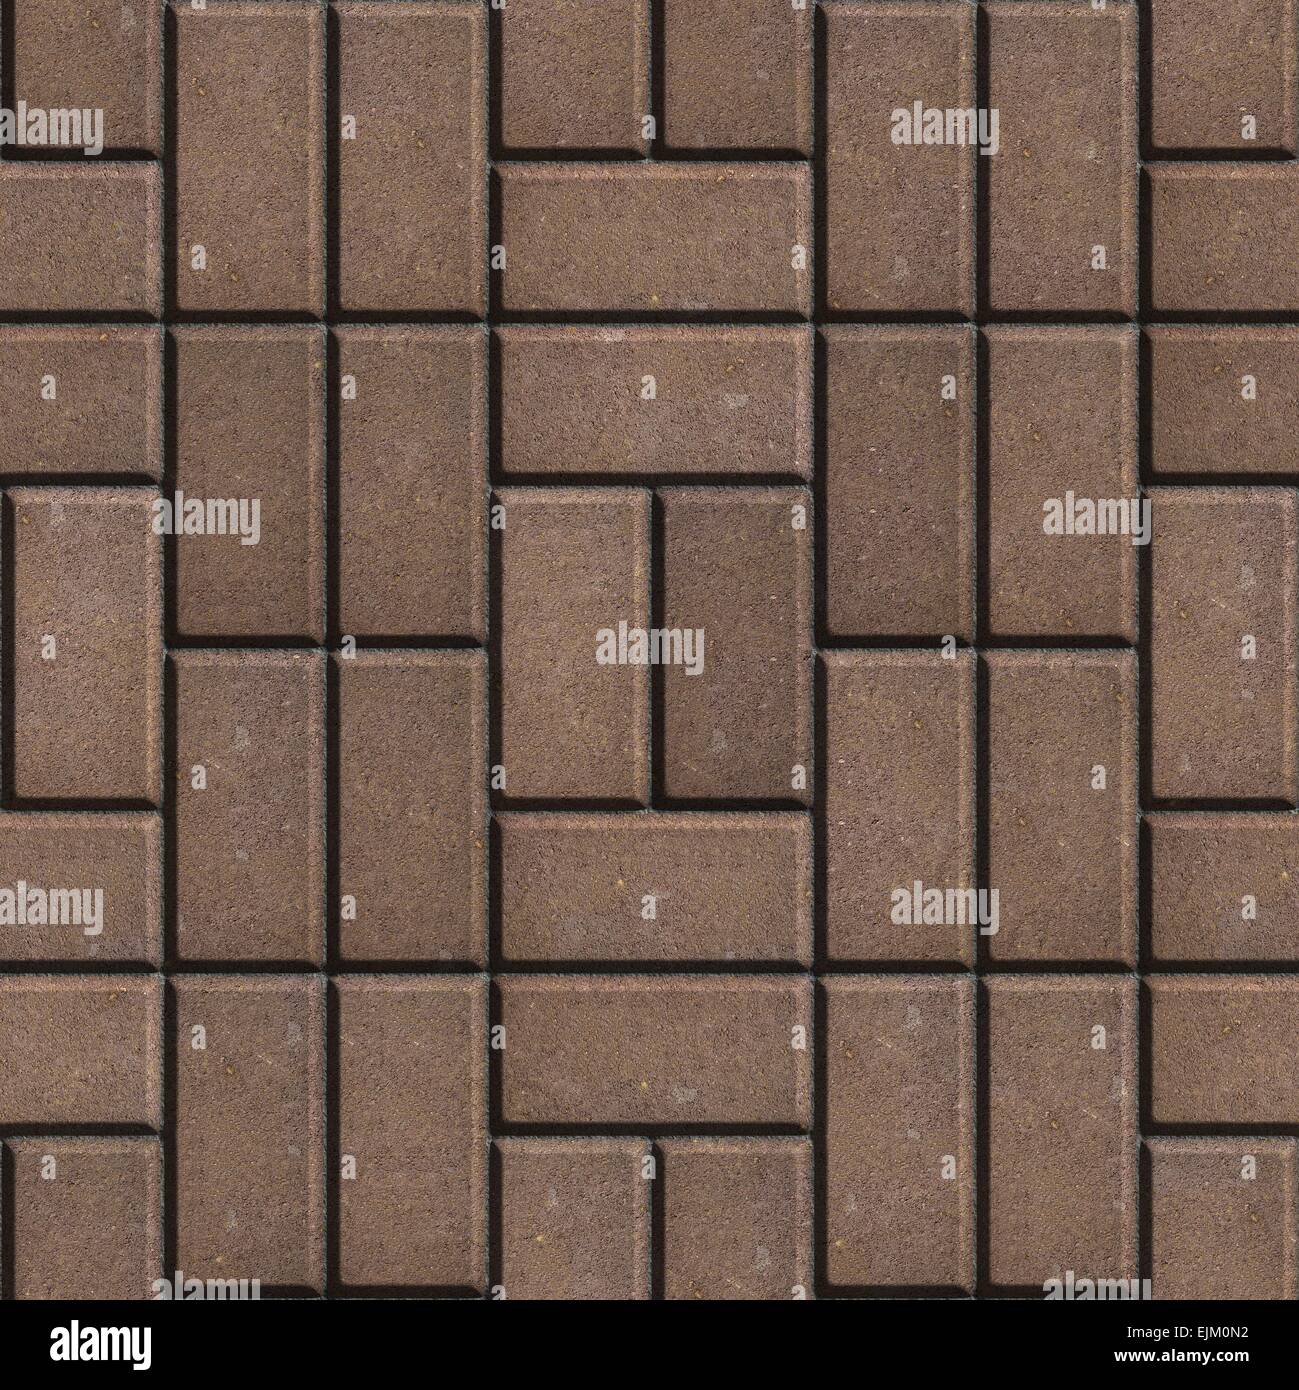 Brown Pave Slabs Rectangles Laid out in a Chaotic Manner. Stock Photo